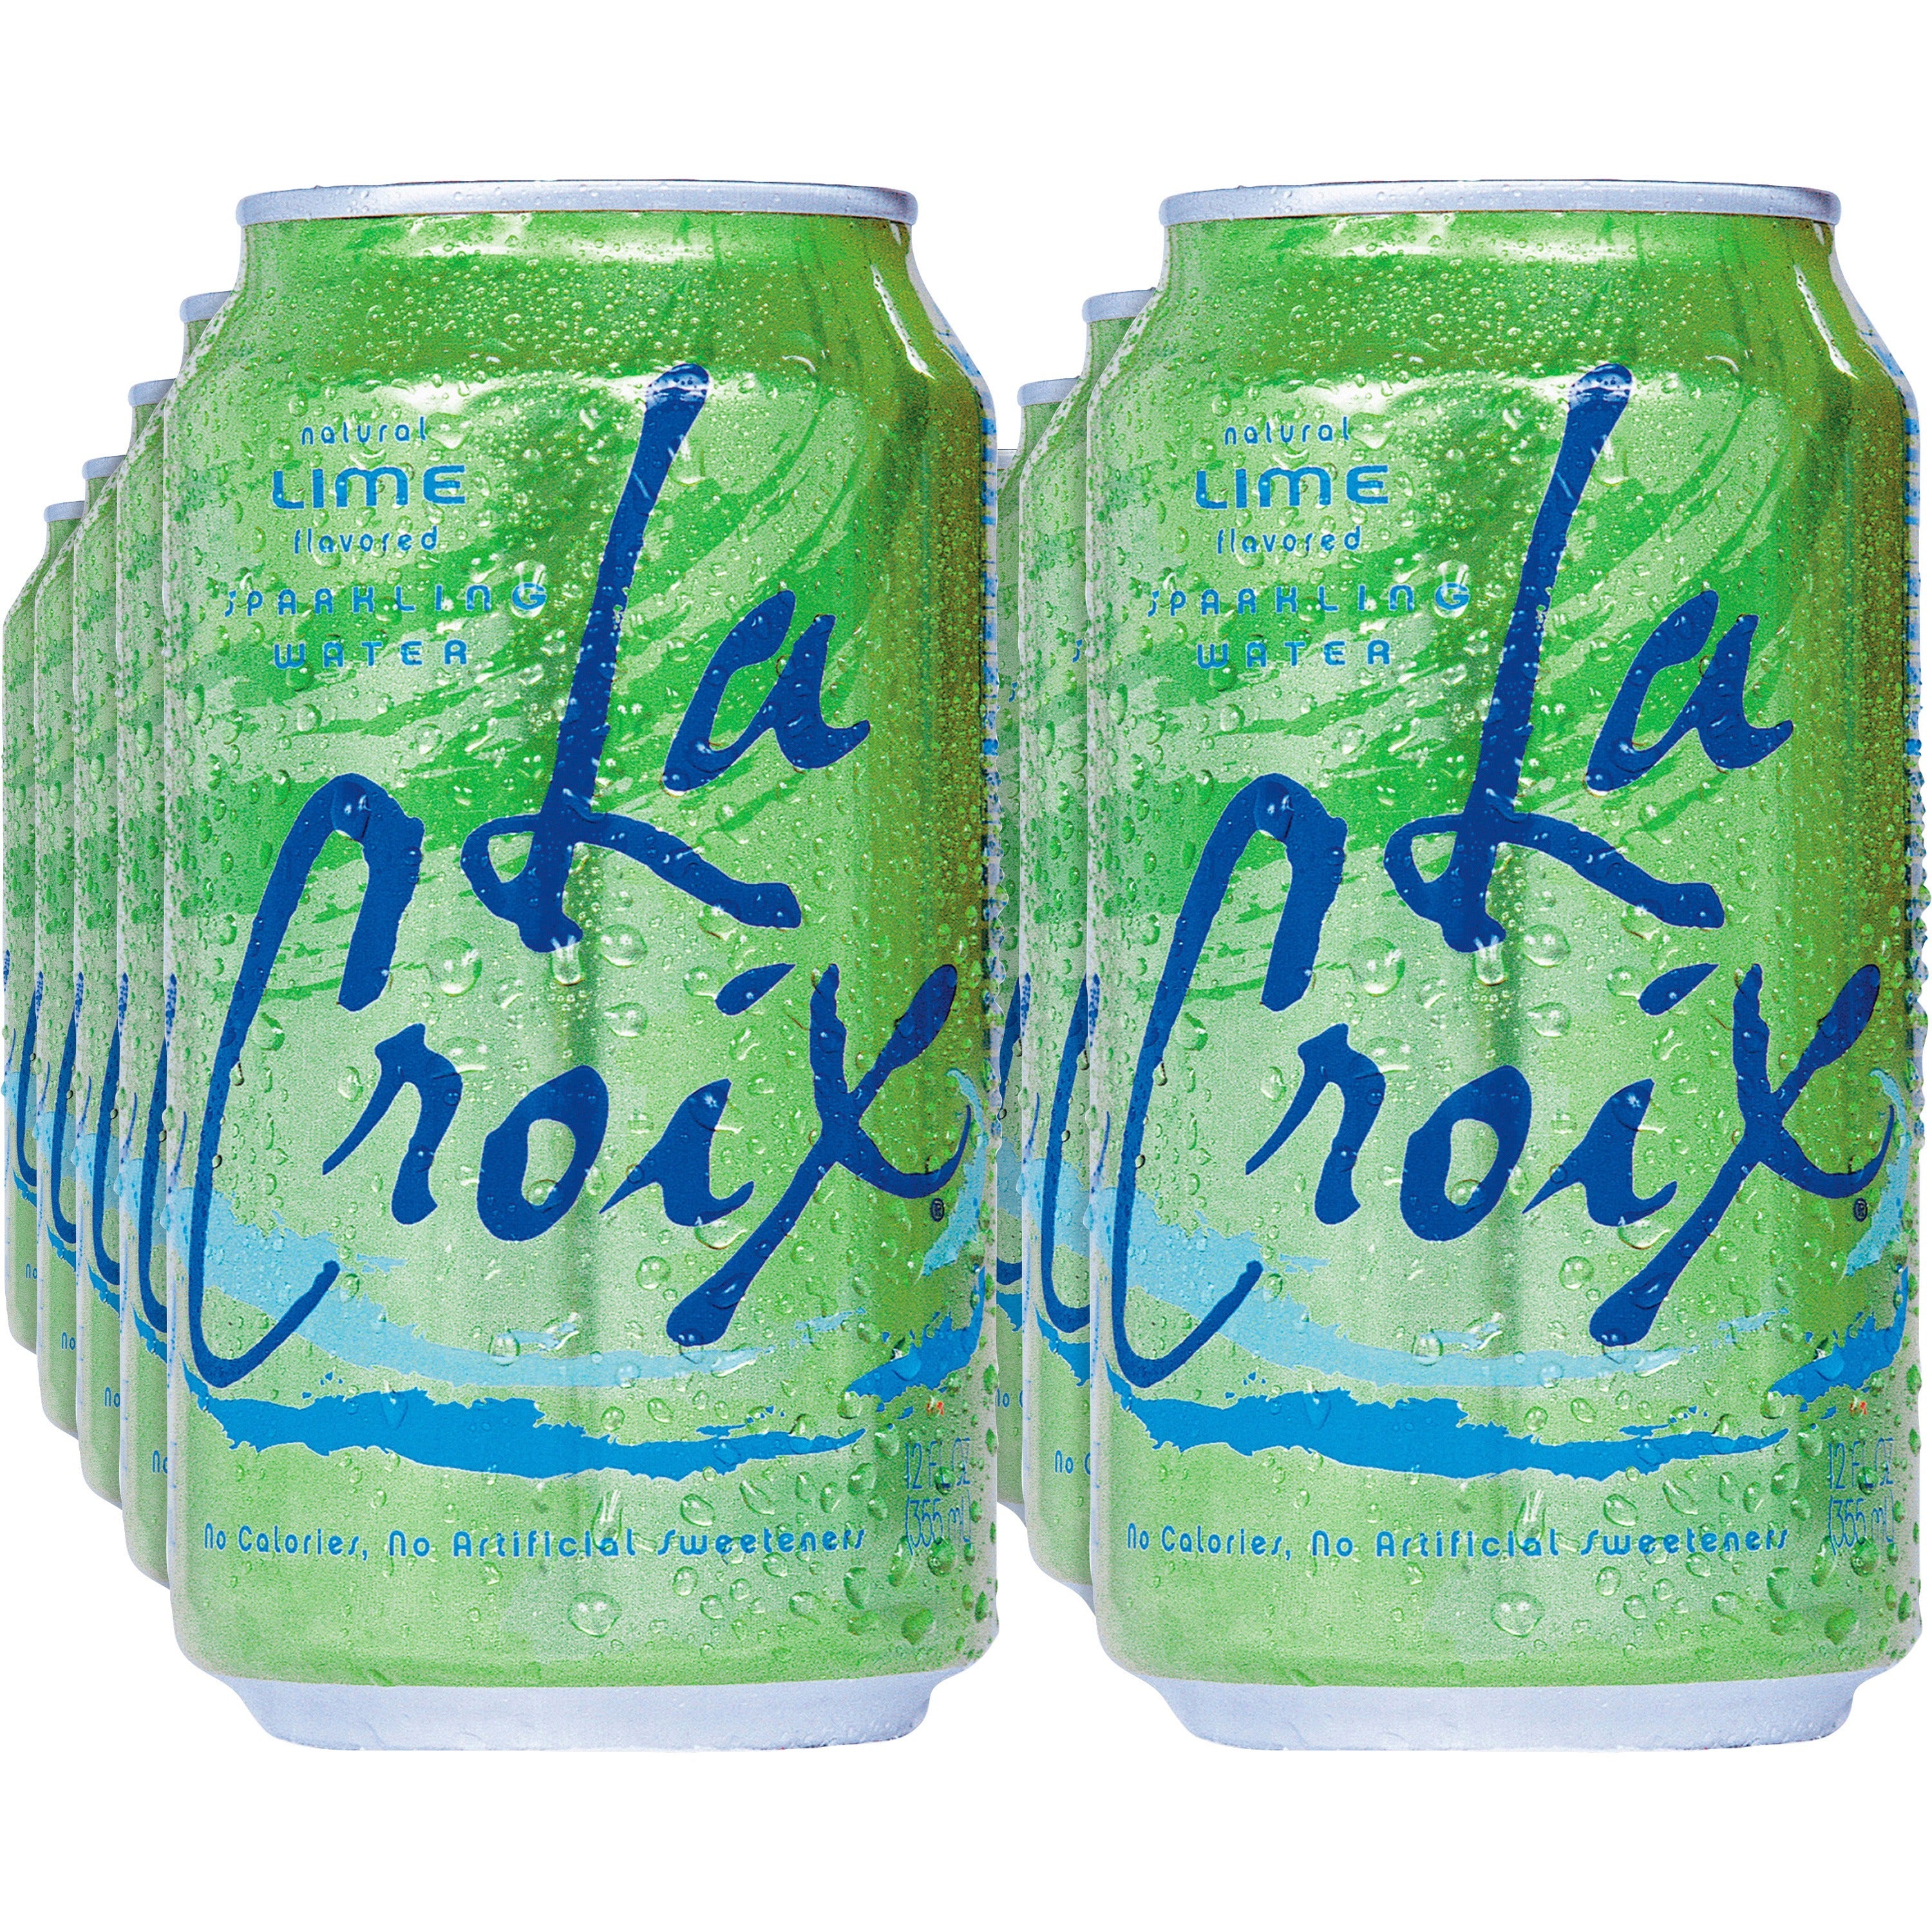 lacroix-lime-flavored-sparkling-water-ready-to-drink-12-fl-oz-355-ml-2-carton-12-pack_lcx40125 - 1